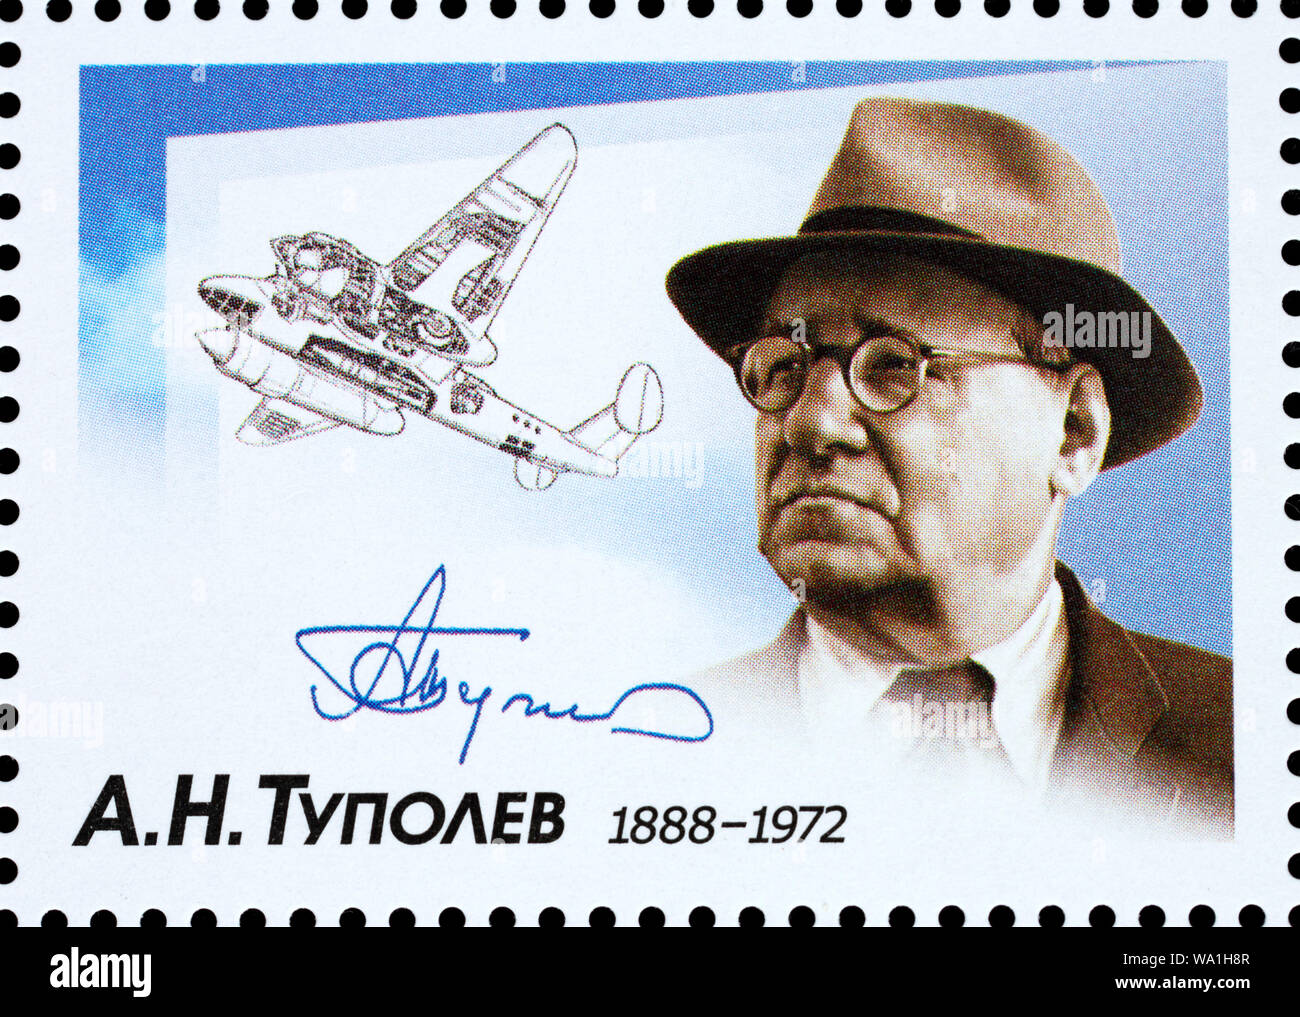 Andrei Tupolev (1888-1972), Soviet aircraft designer, postage stamp, Russia, USSR, 2013 Stock Photo